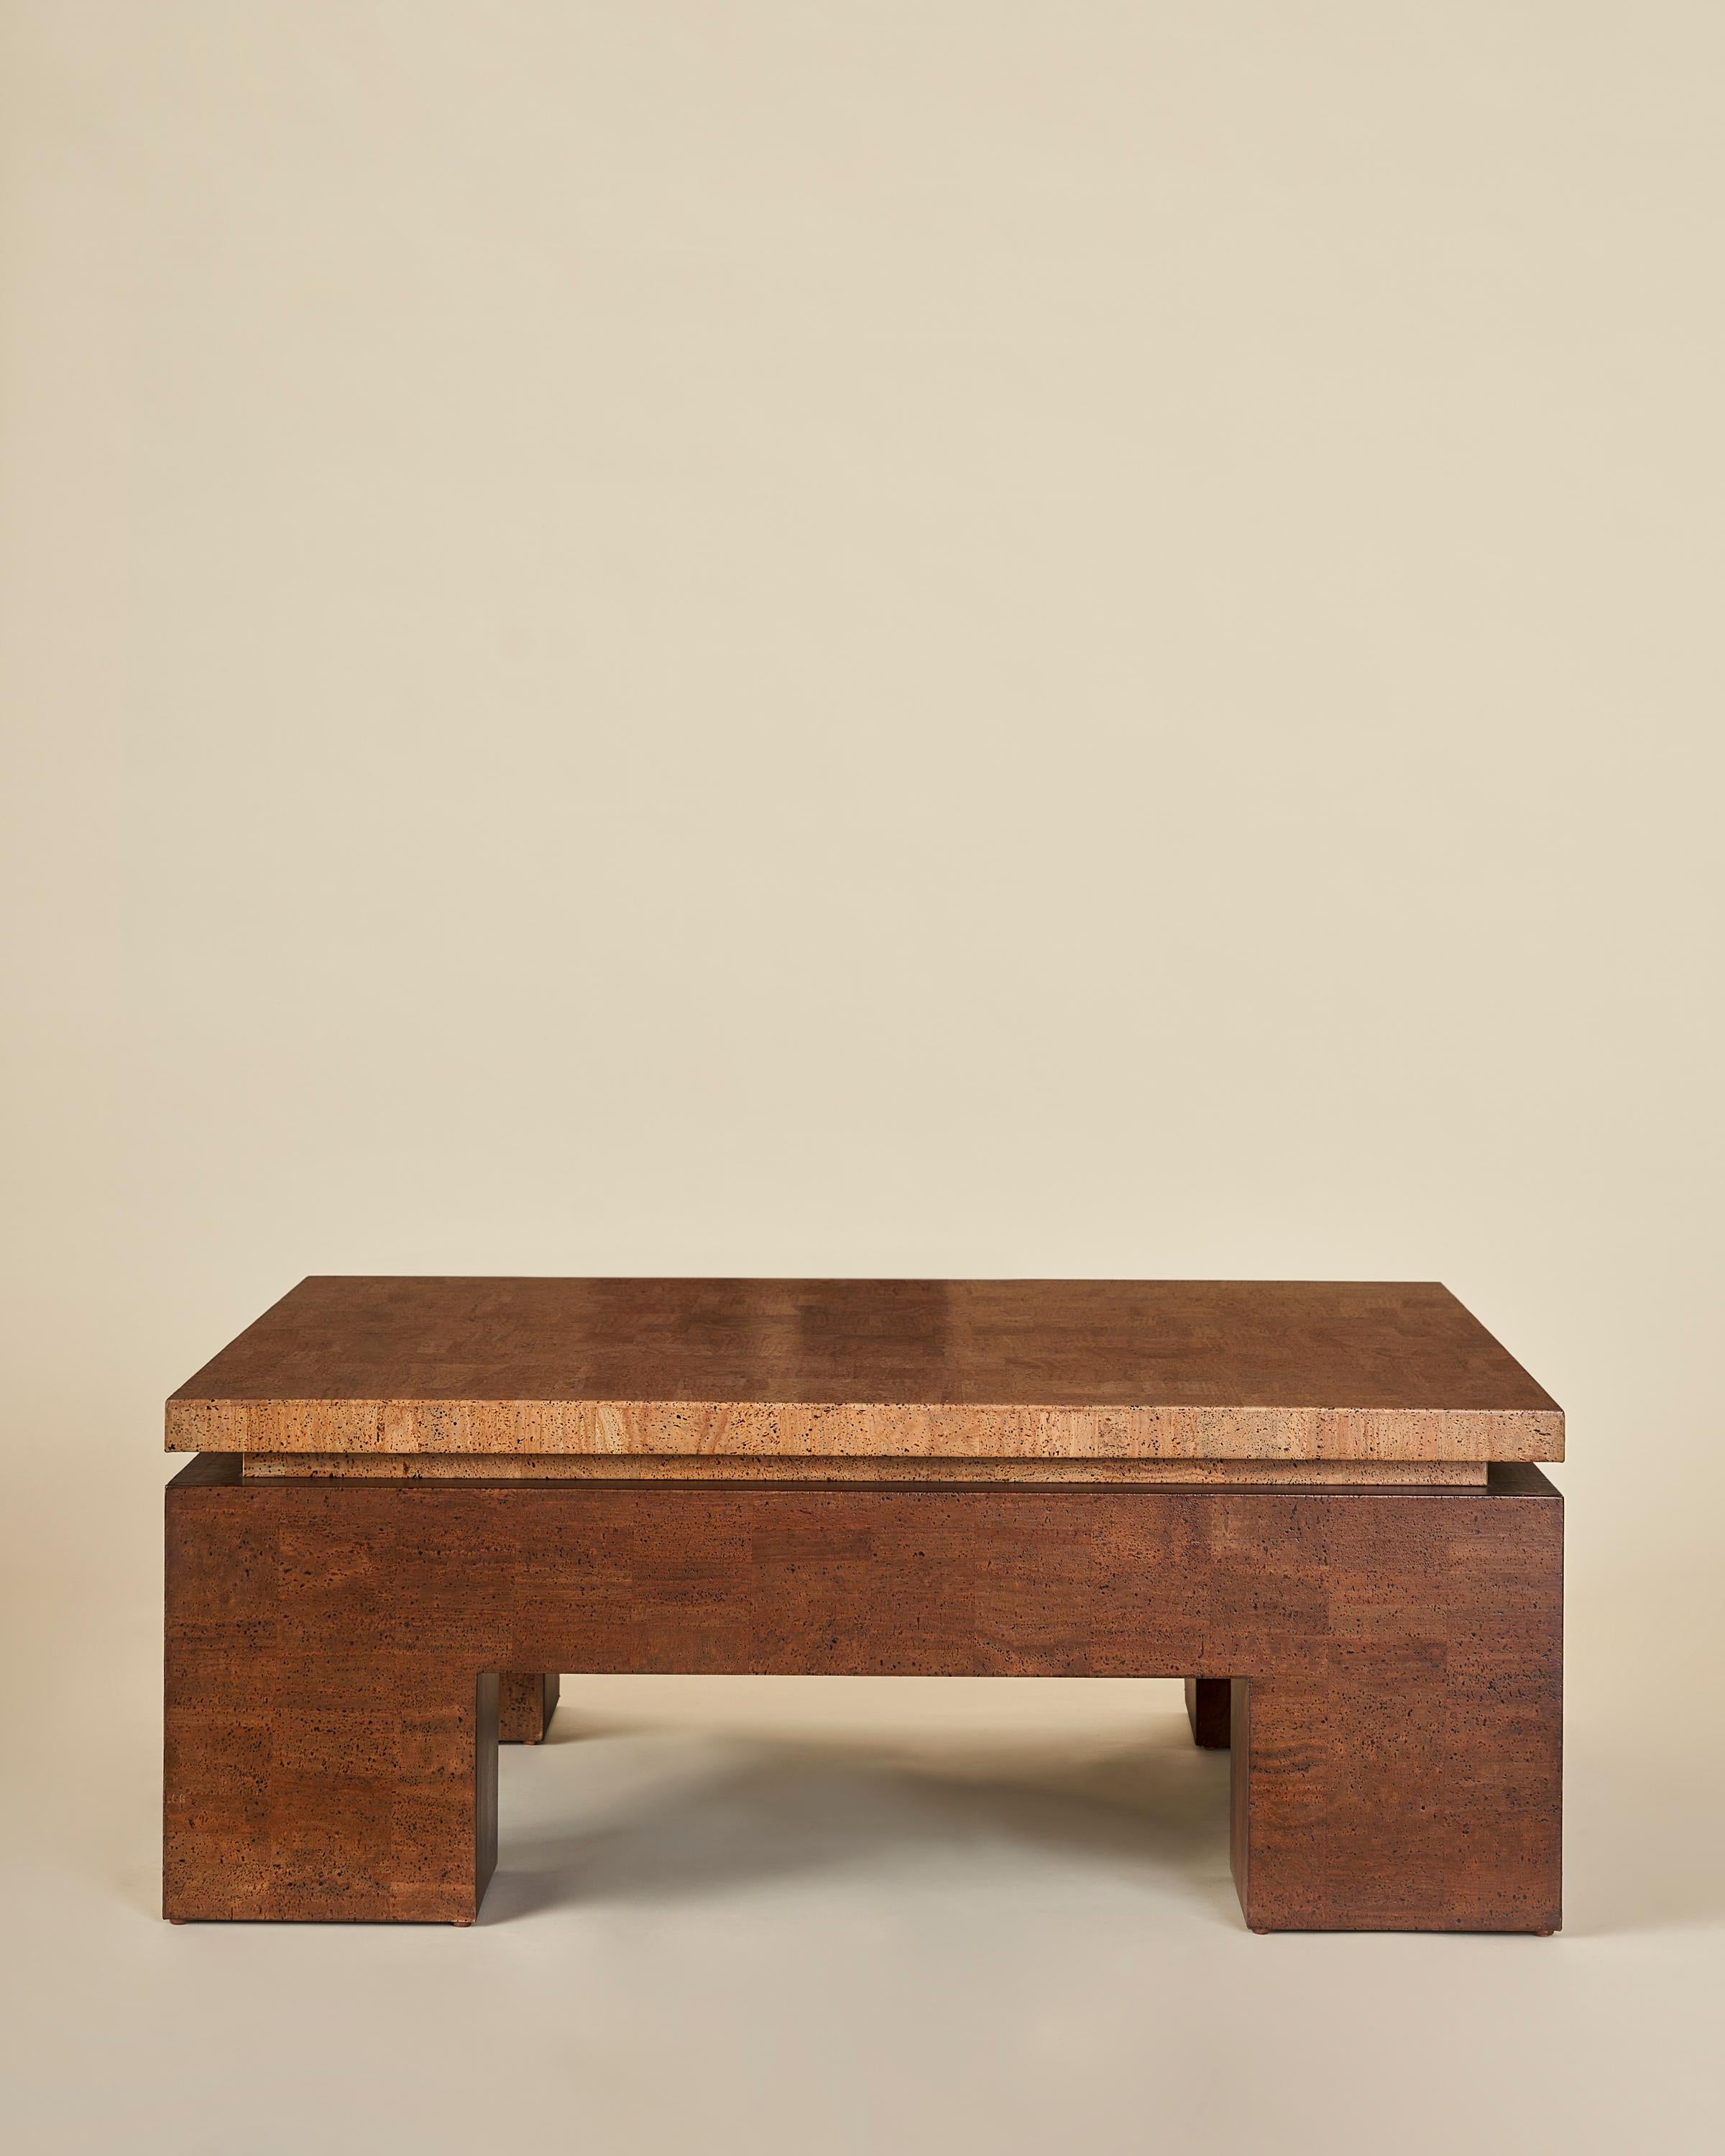 A handcrafted square coffee table constructed in two tones of cork. The table boasts a floating top that rests upon a base of generous proportions.

Our collection pays homage to the everlasting idea of home, a place that is alive as its own